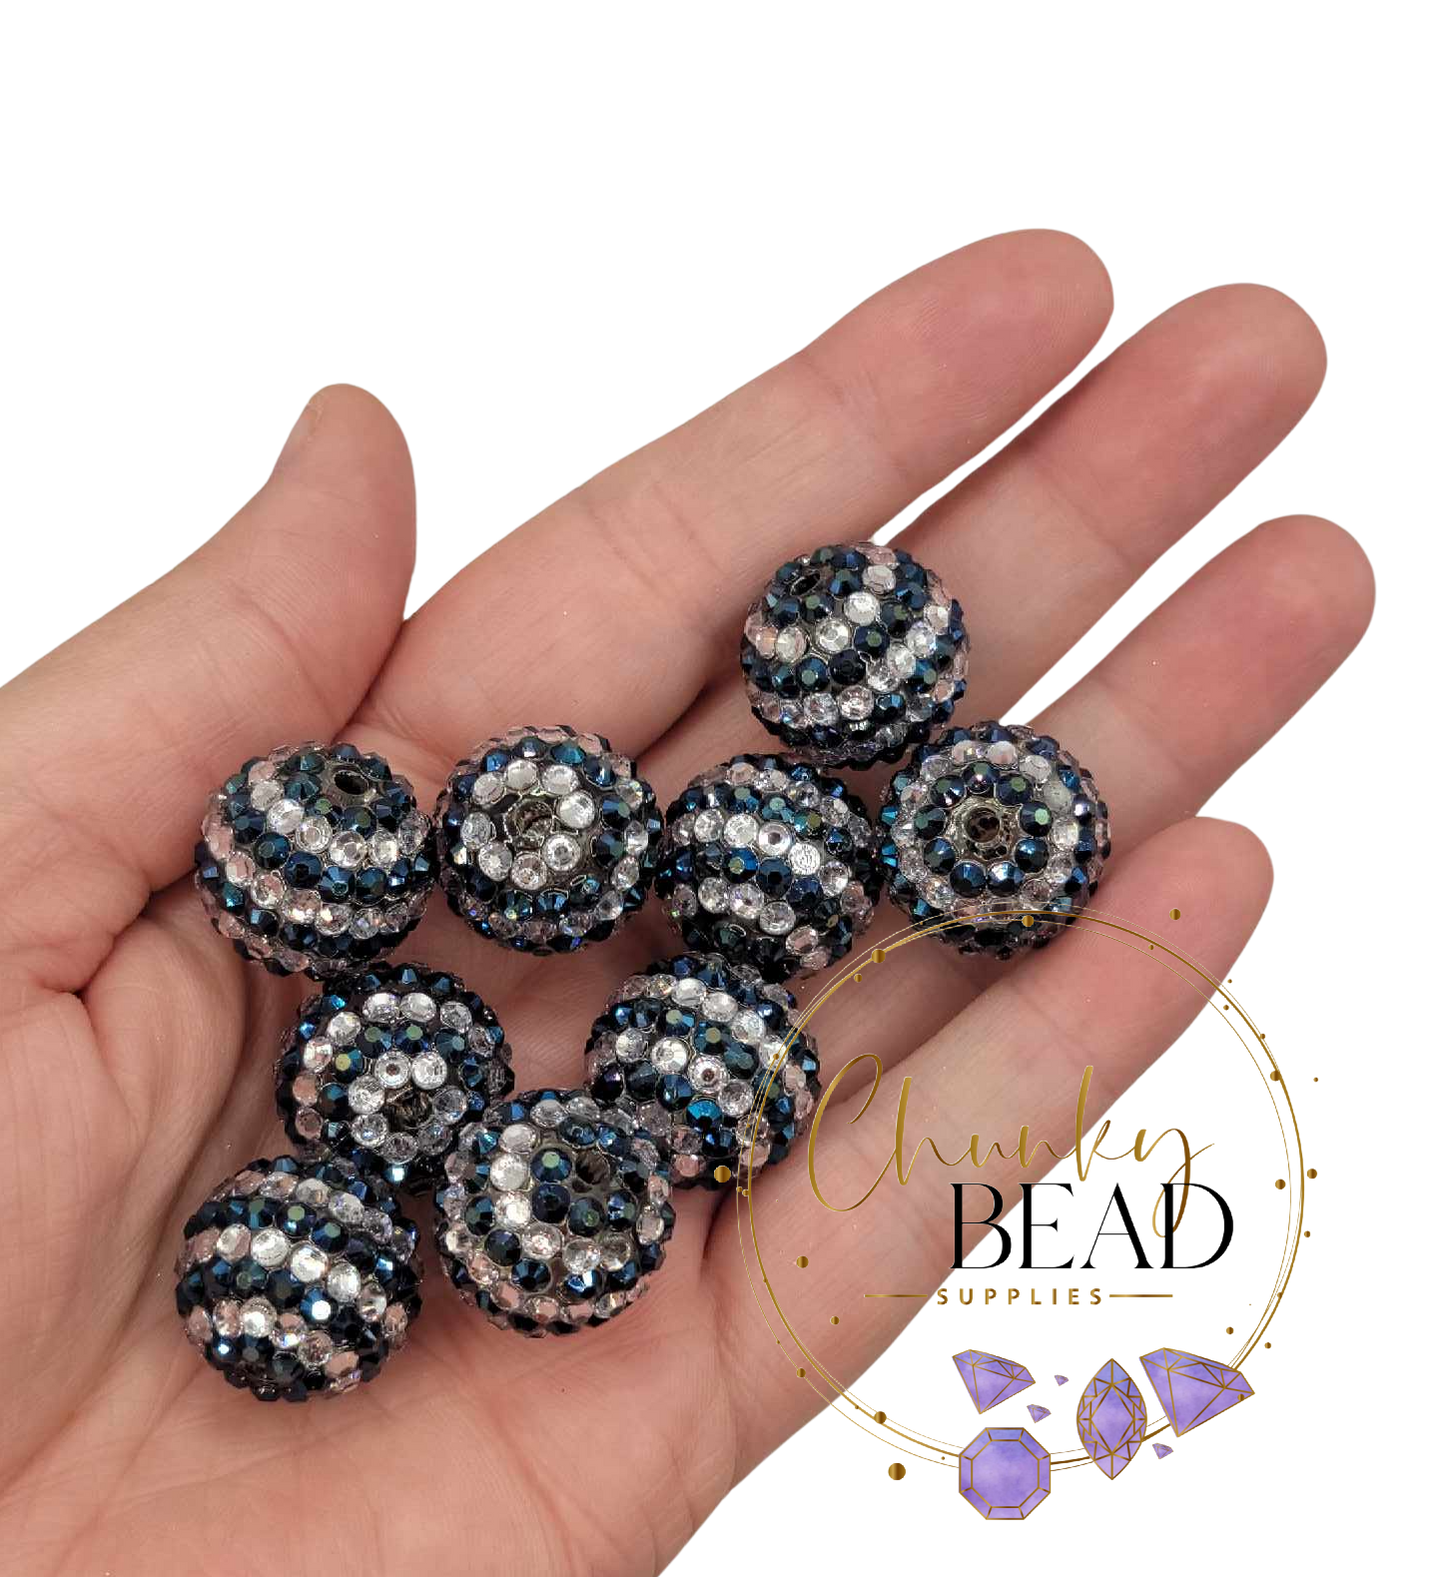 20mm "Navy Blue and Clear" Rhinestone Acrylic Beads